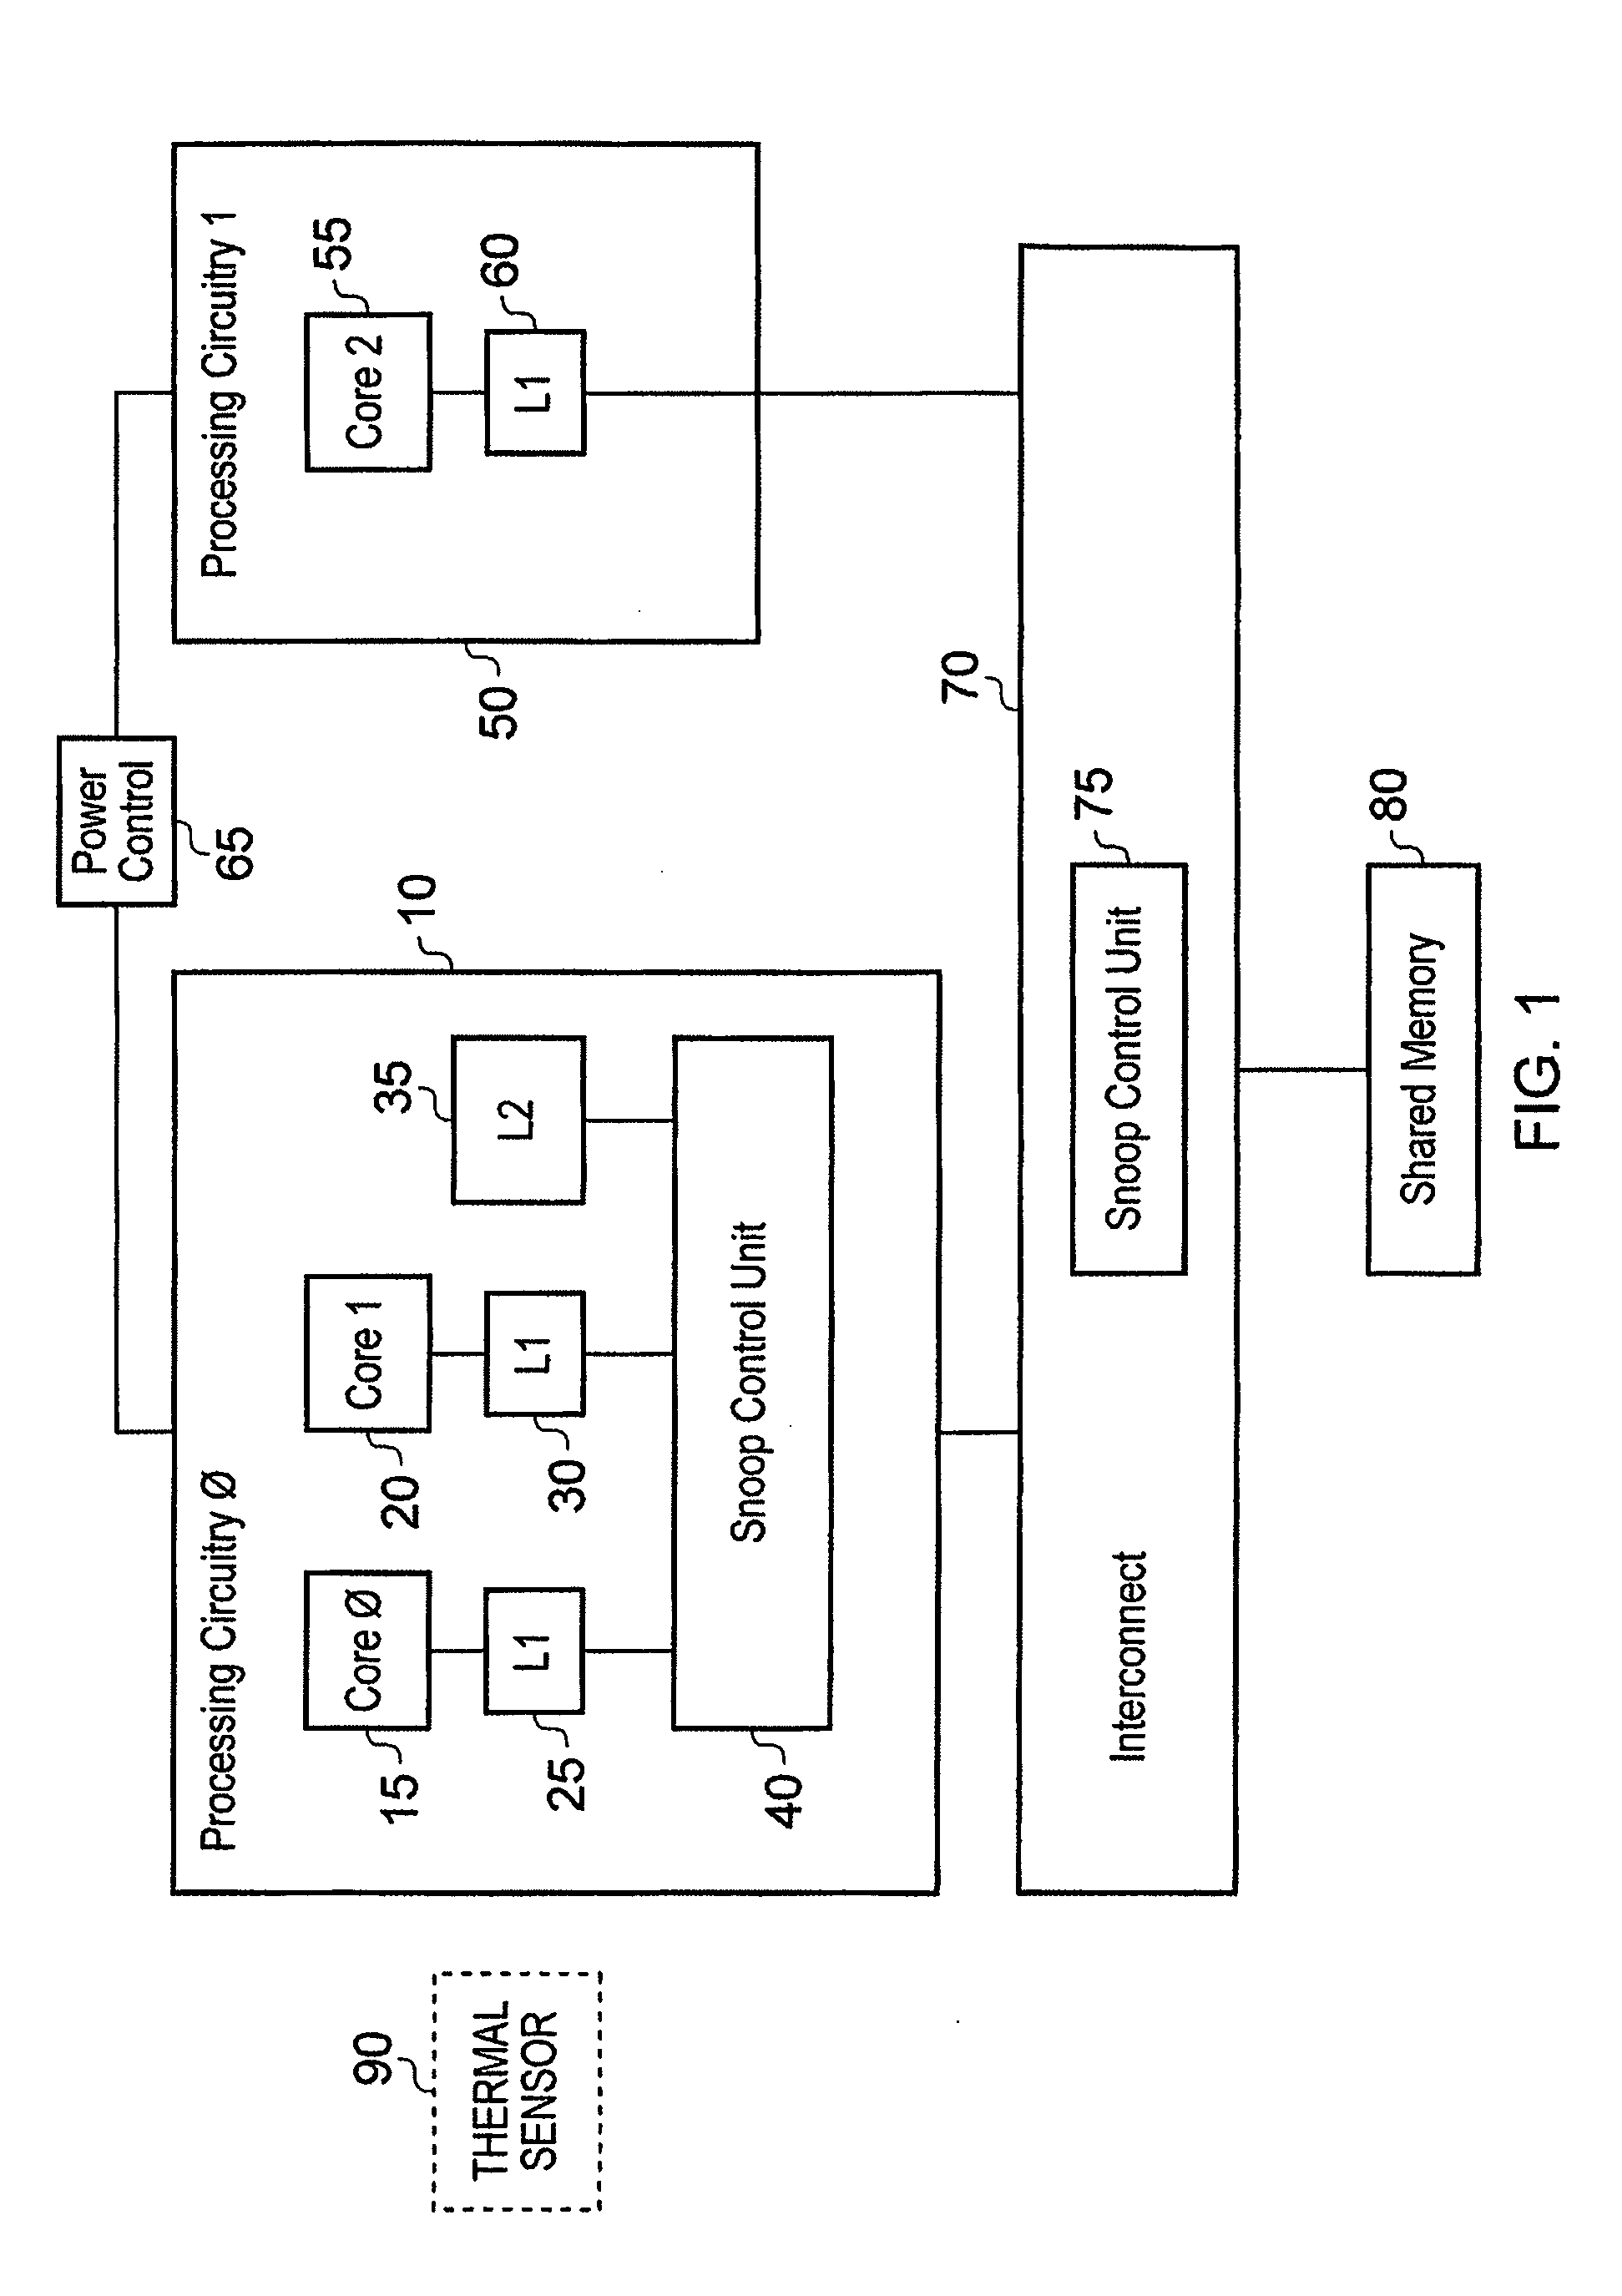 Data processing apparatus and method for switching a workload between first and second processing circuitry